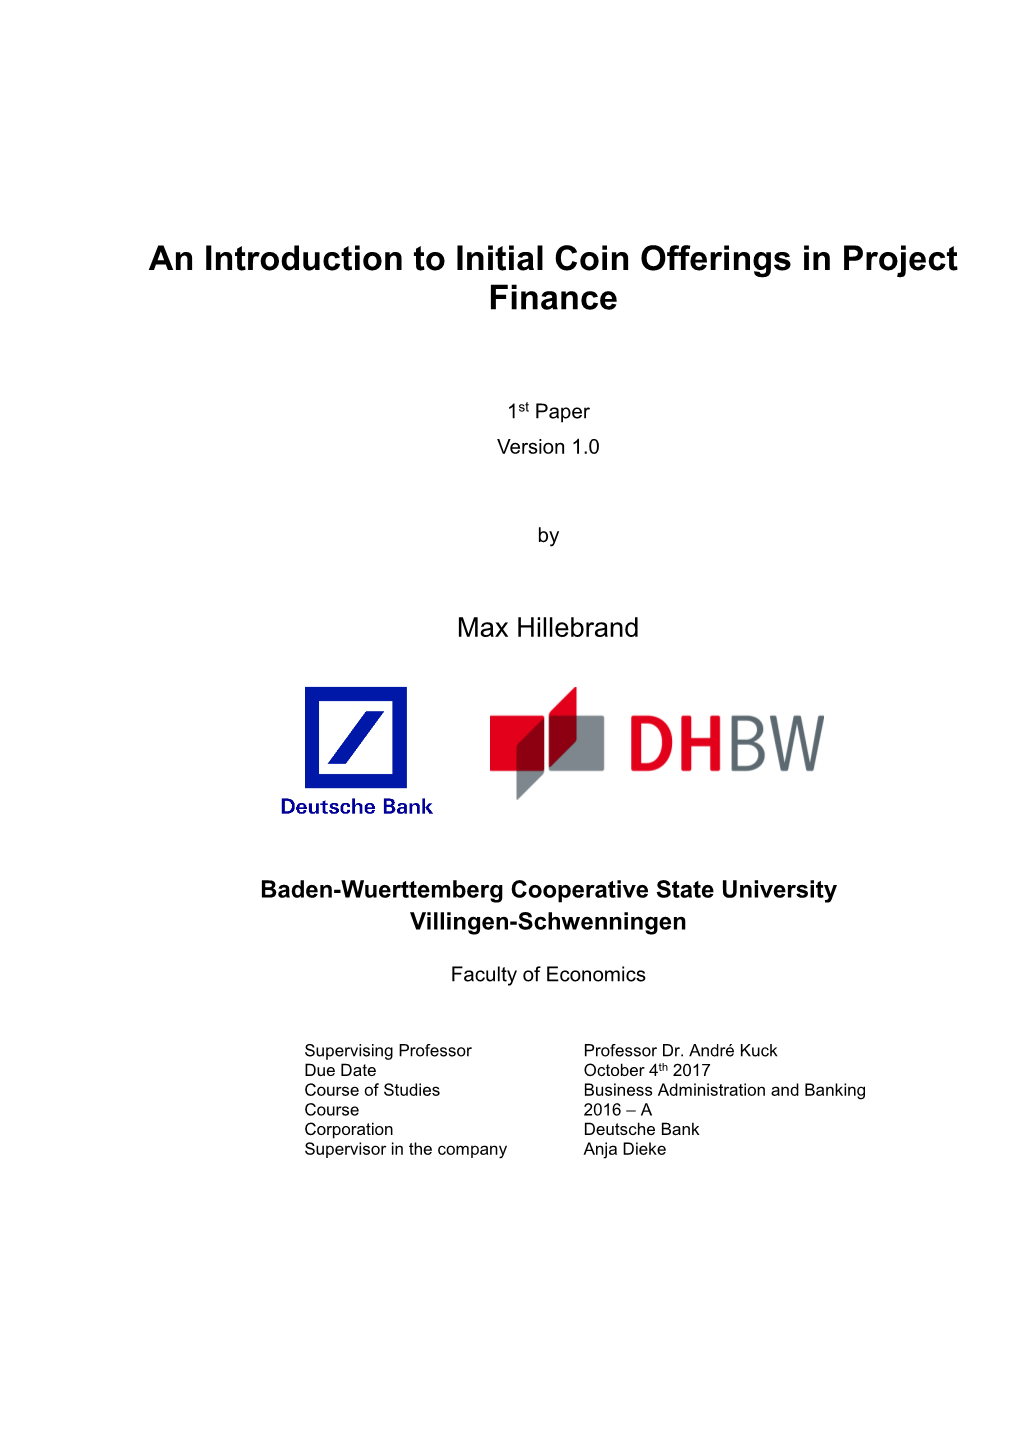 An Introduction to Initial Coin Offerings in Project Finance